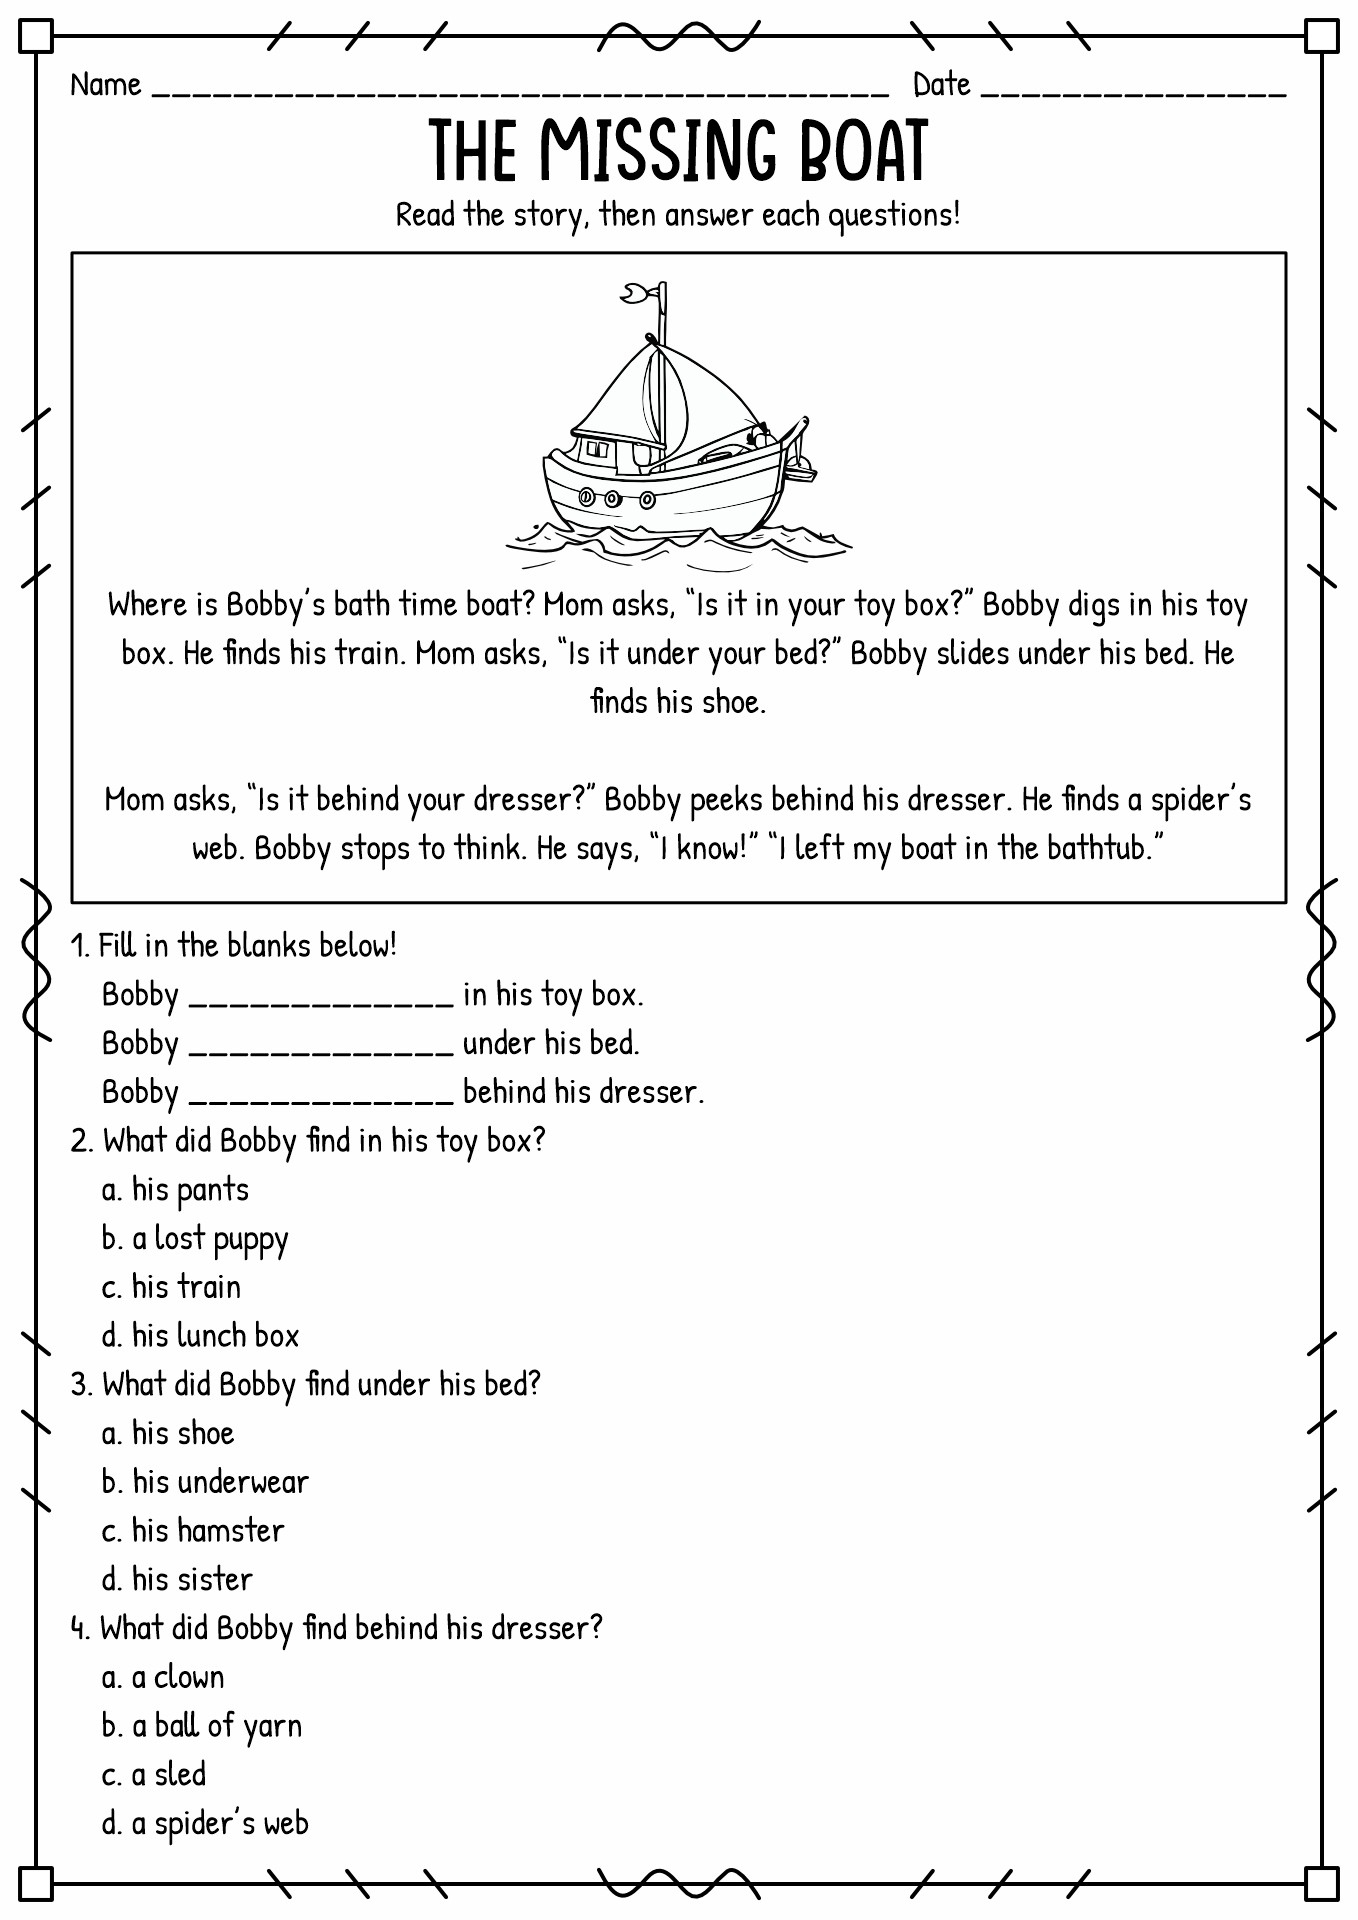 17 Second Grade Short Story Worksheet - Free Pdf At Worksheeto pertaining to Free Printable Short Stories for 2nd Graders